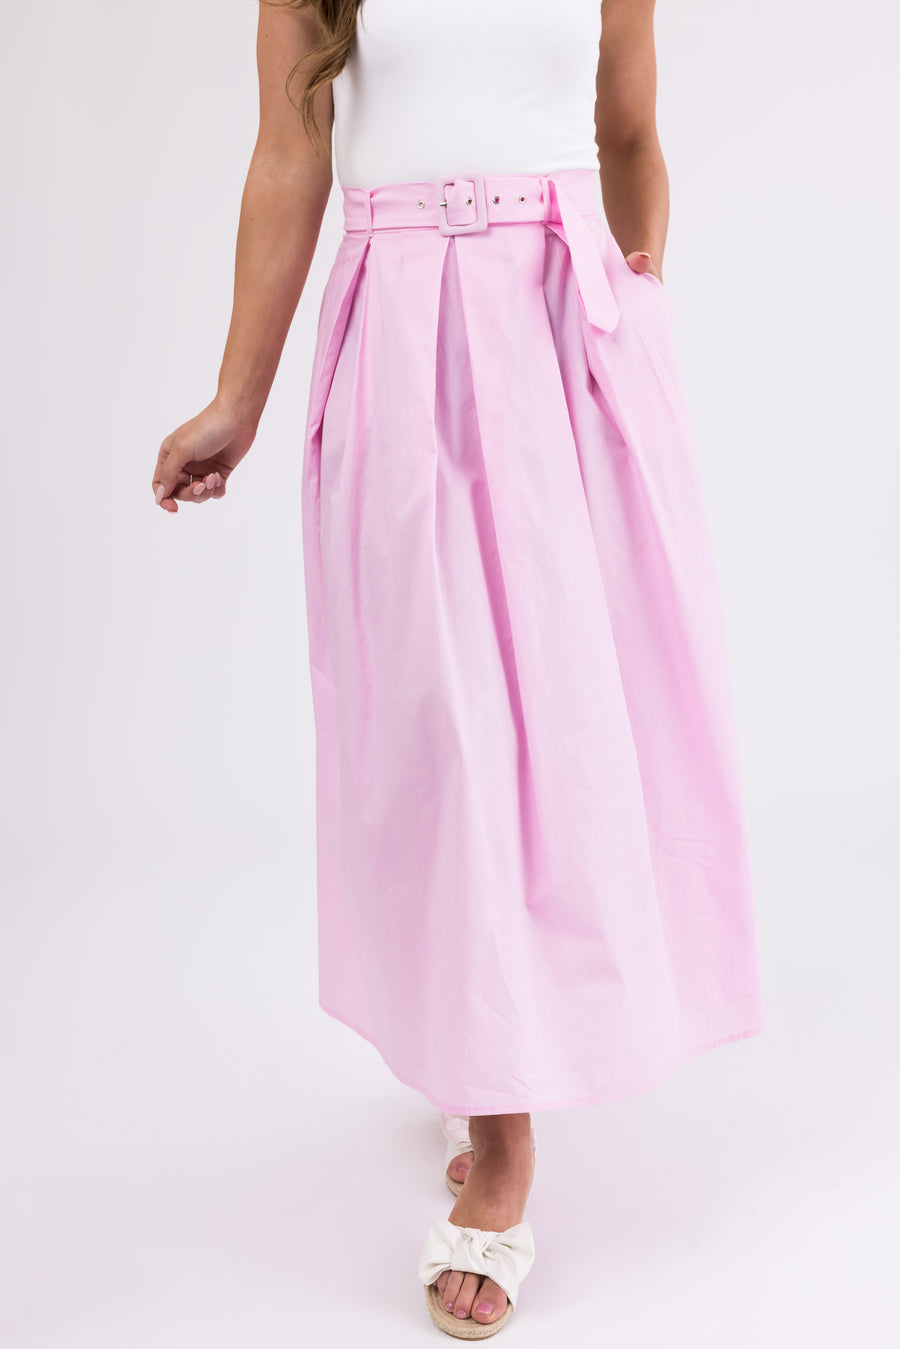 Carnation Pink Belted Woven A Line Maxi Skirt